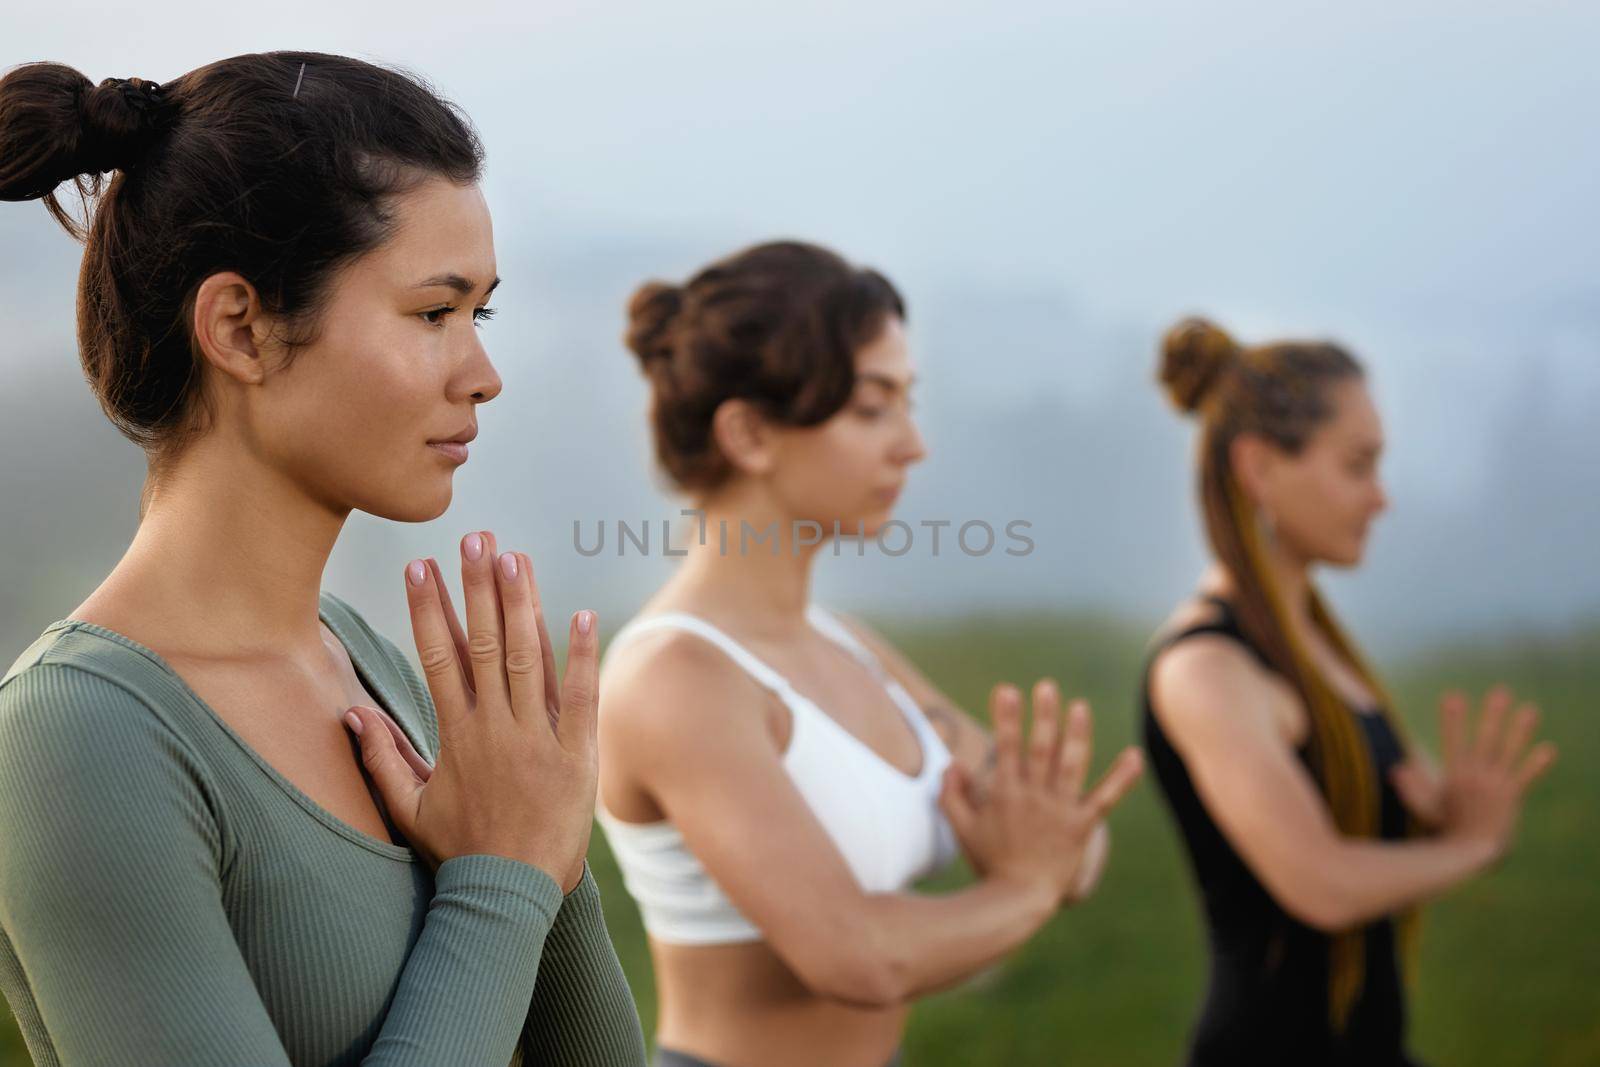 Crop of young brunette female near blurring girls putting palms together practicing yoga outdoors in morning. Close up of women standing in namaste poses. Concept of calmness and inner peace.